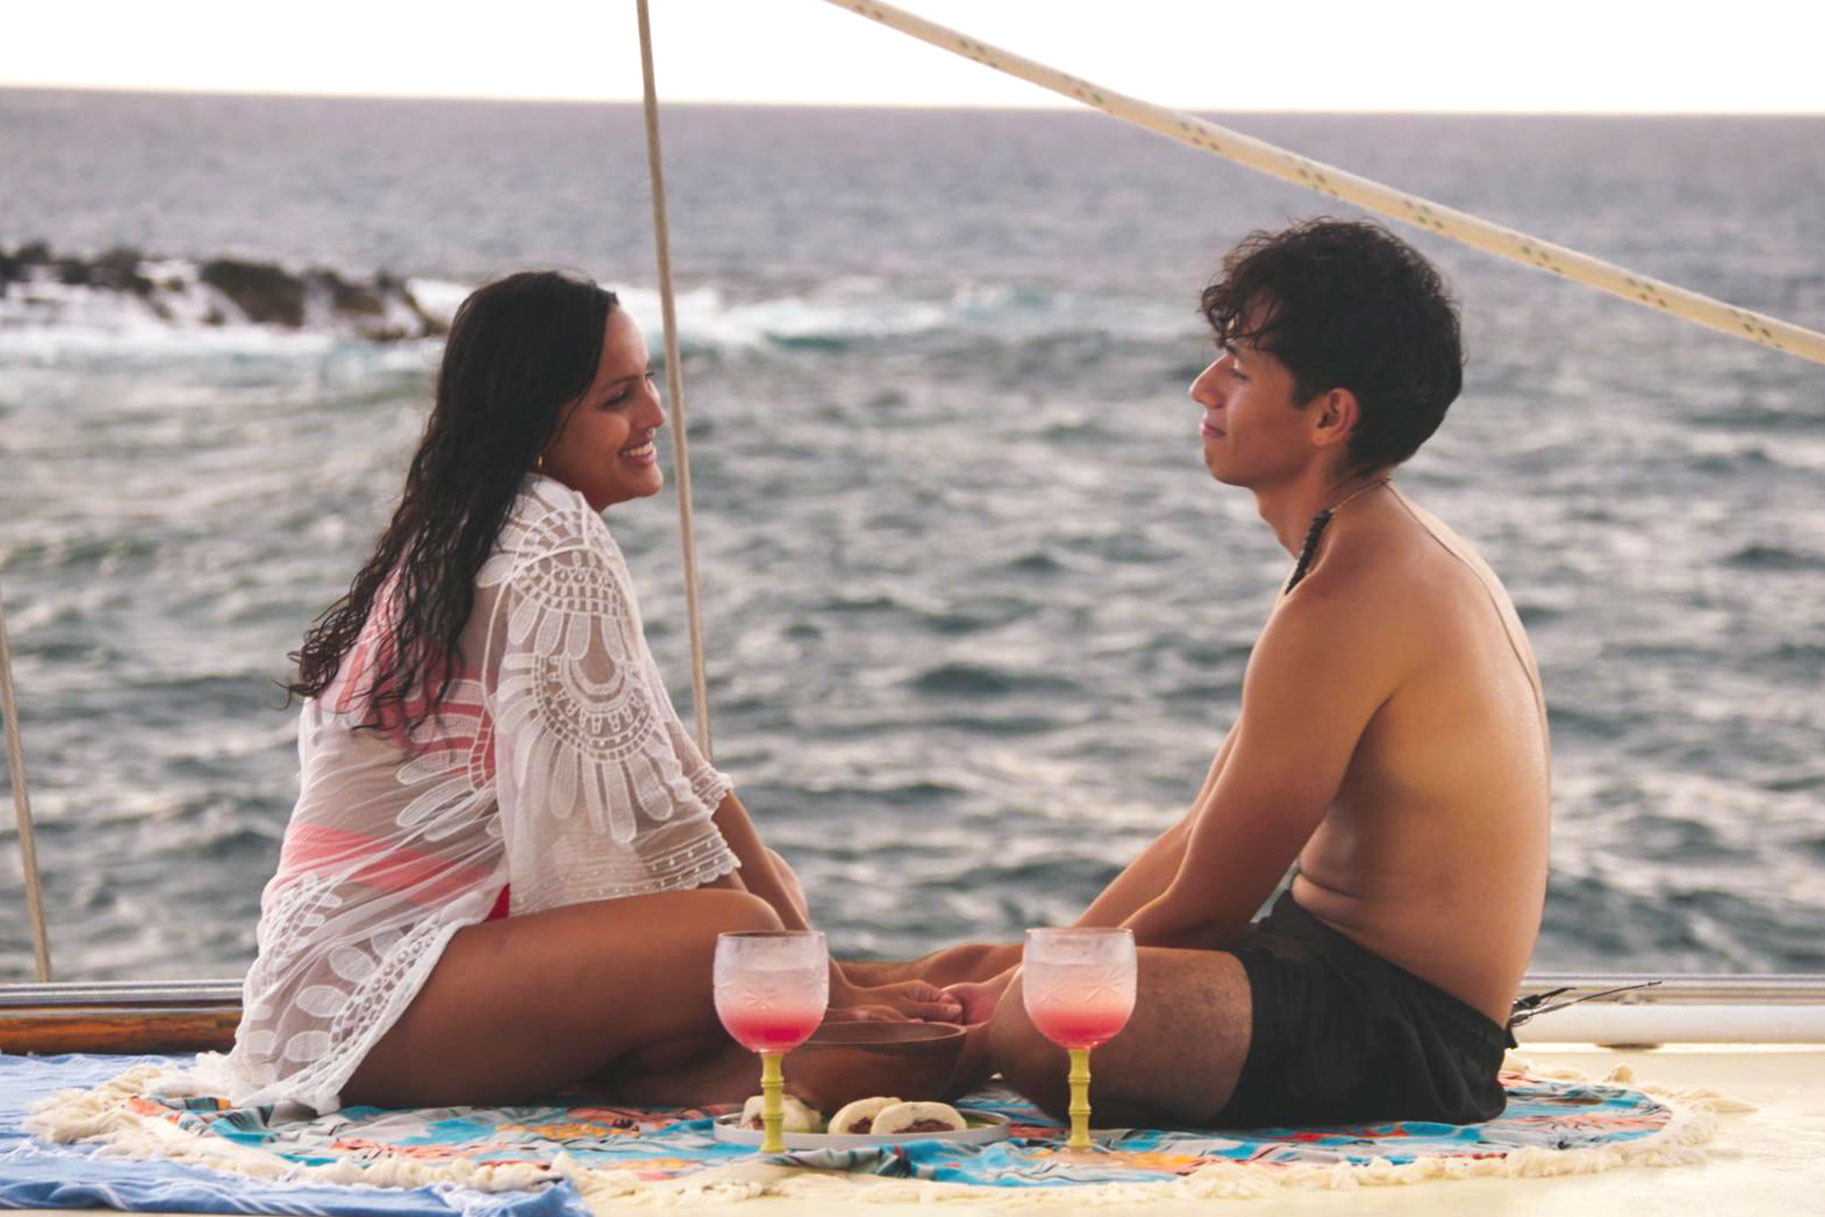 Edgar and Marissa sit facing each other in front of the ocean, holding hands